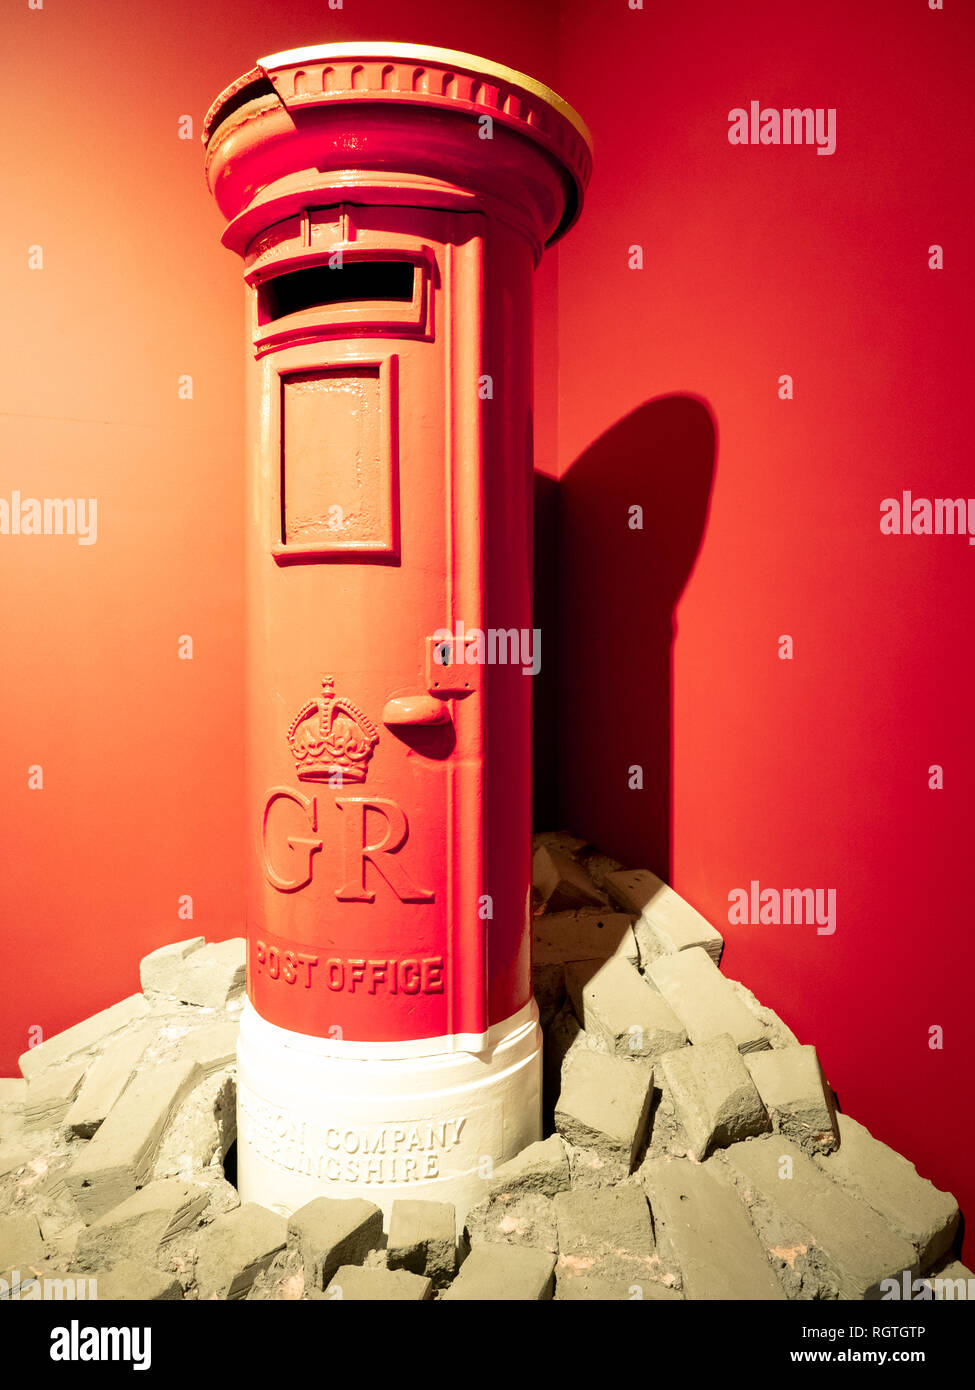 The history of letter boxes - The Postal Museum